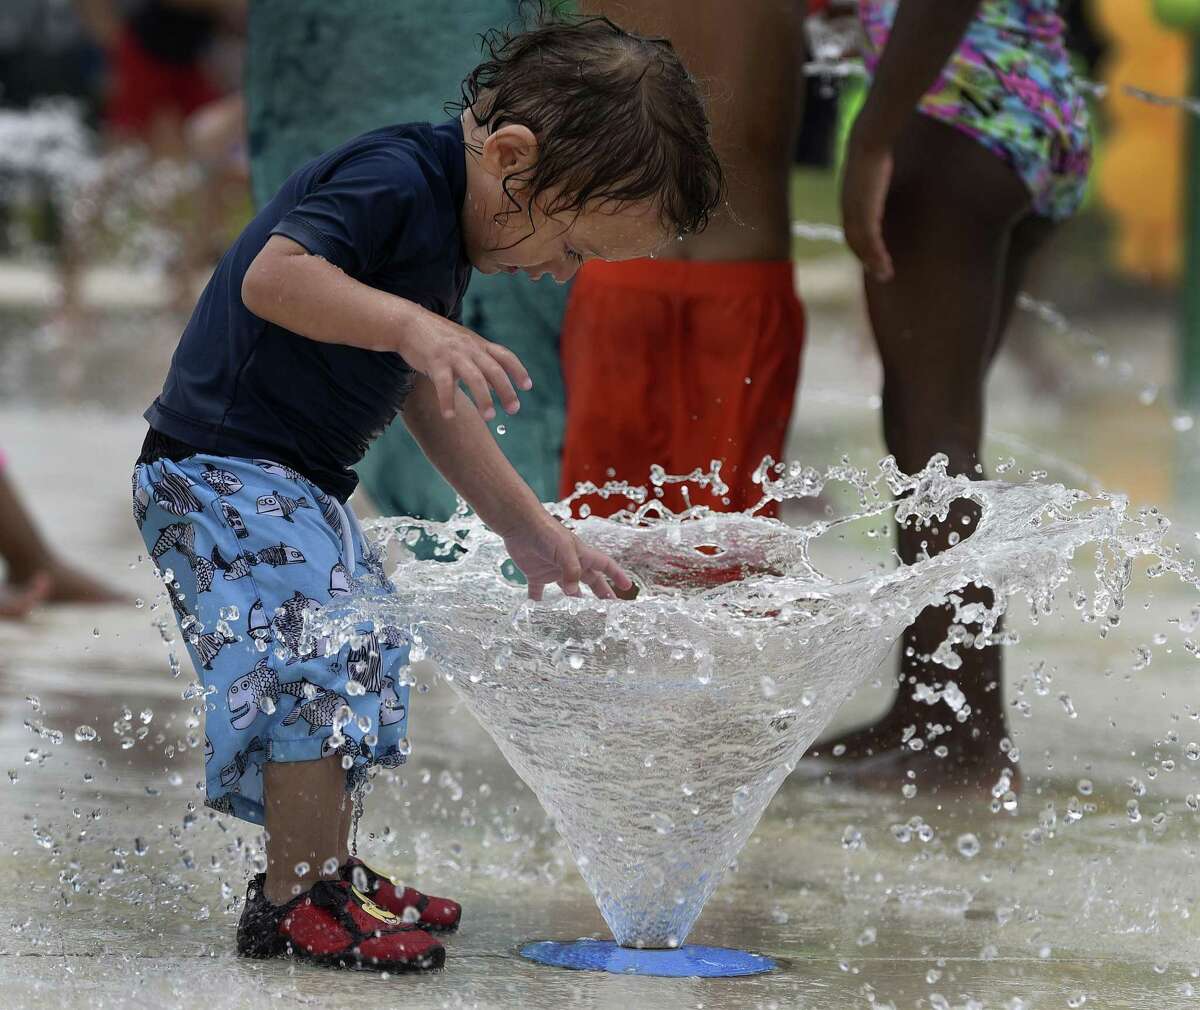 The National Weather Service is reminding San Antonians to stay hydrated this weekend as heat indexes hit triple digits.